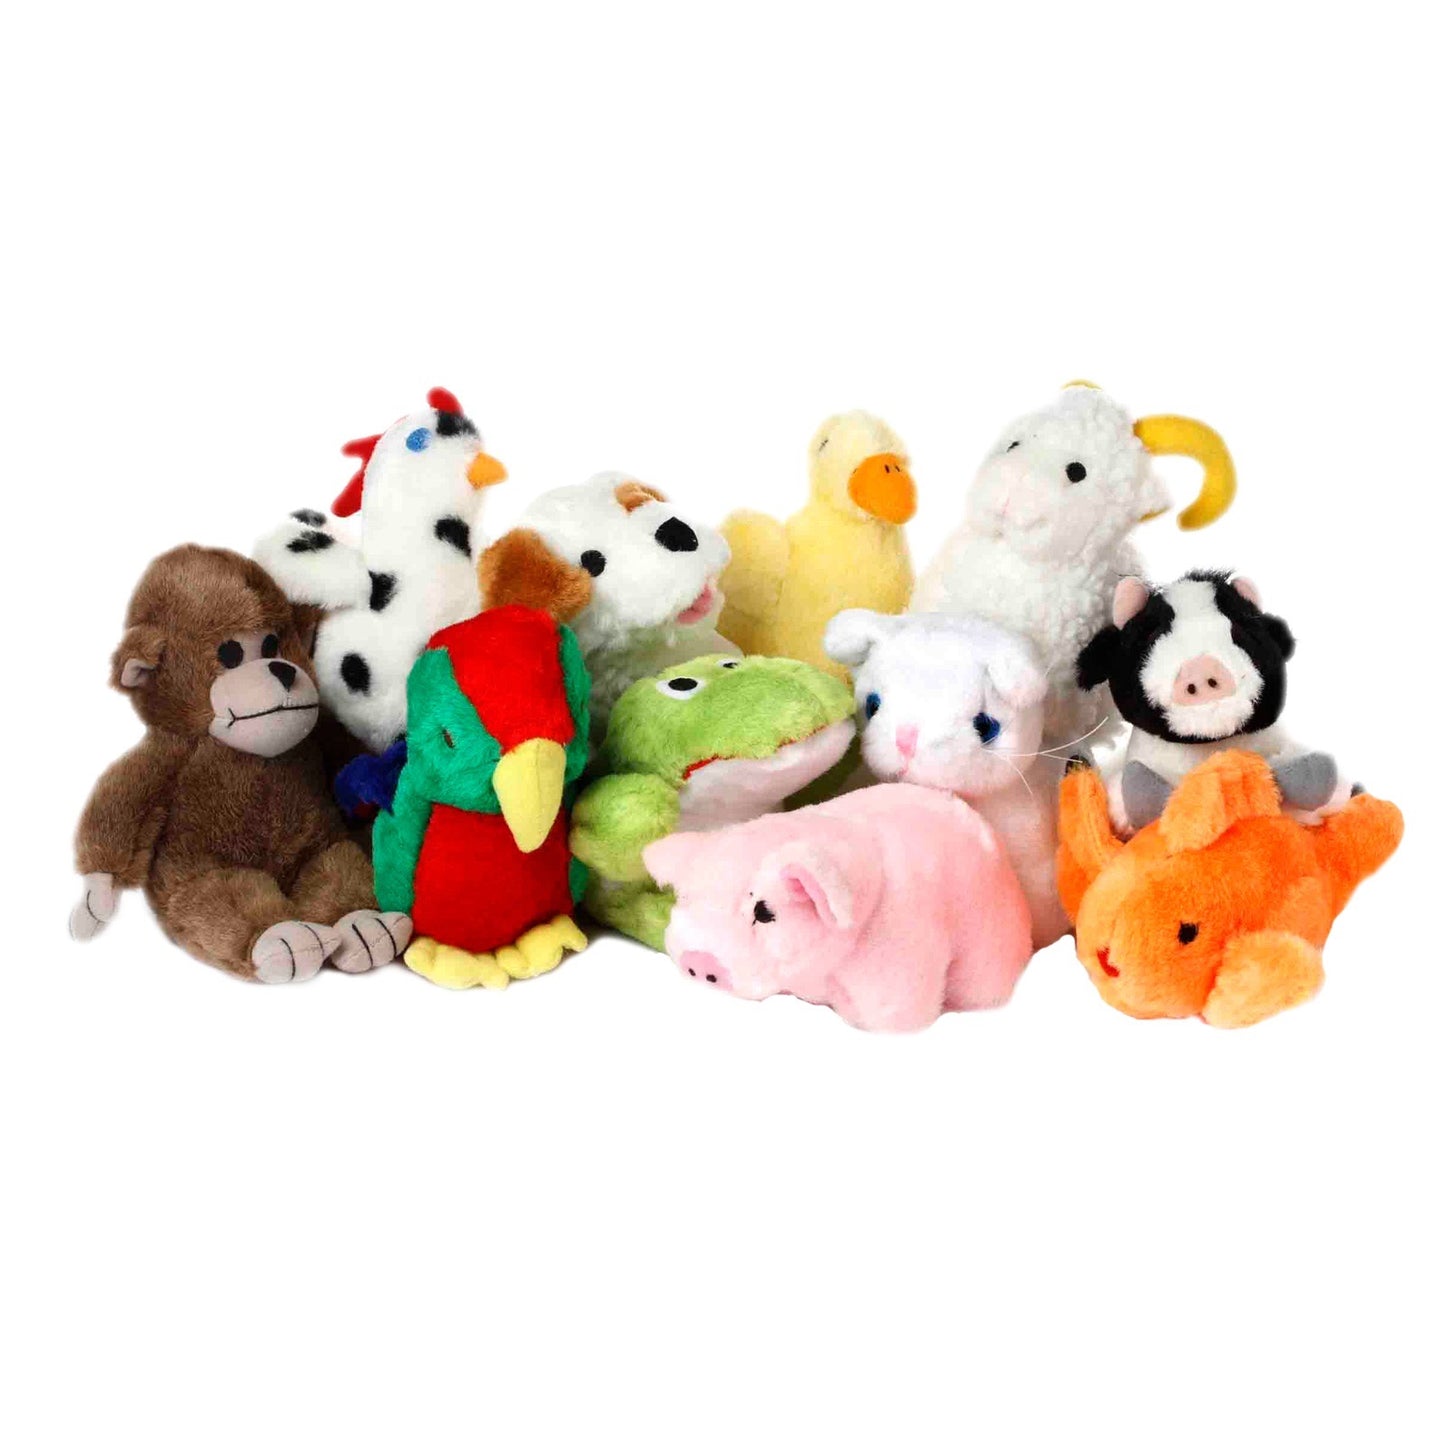 Interactive Talking Toys - Dog Toy - 6 Options